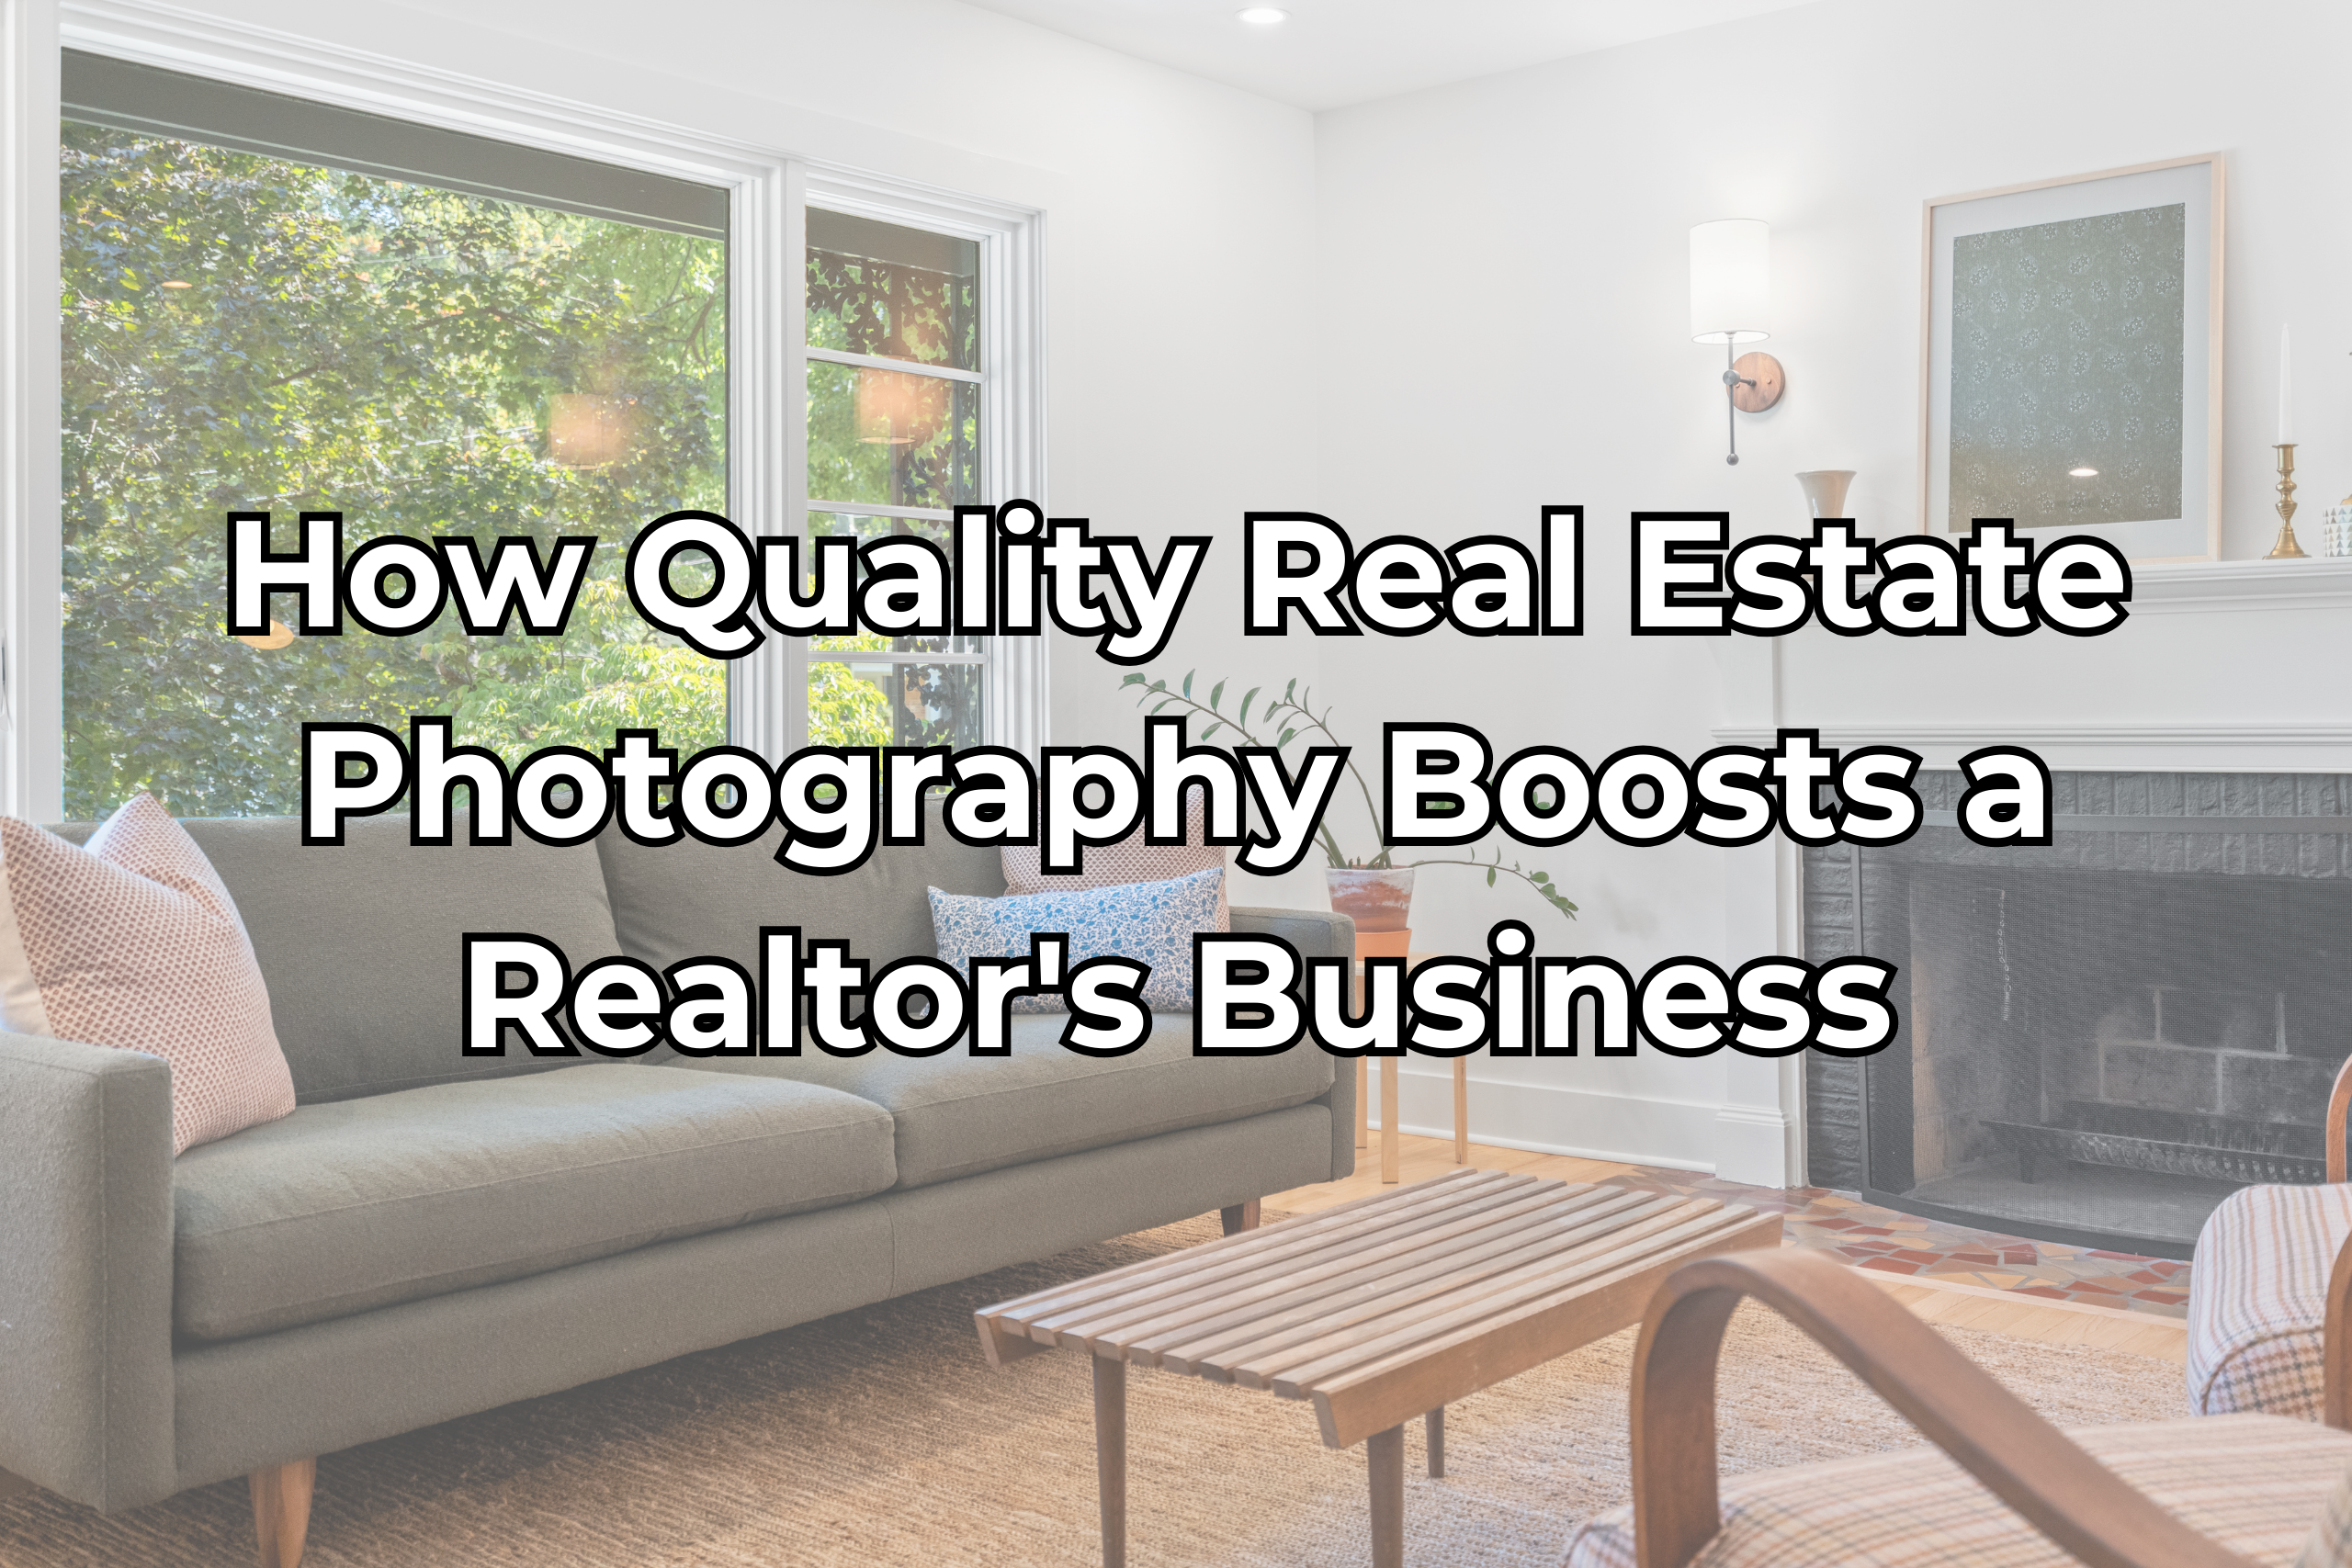 Elevate your realtor game in Alexandria VA and Washington DC with top-notch real estate photography and real estate marketing. Make listing media your winning edge.